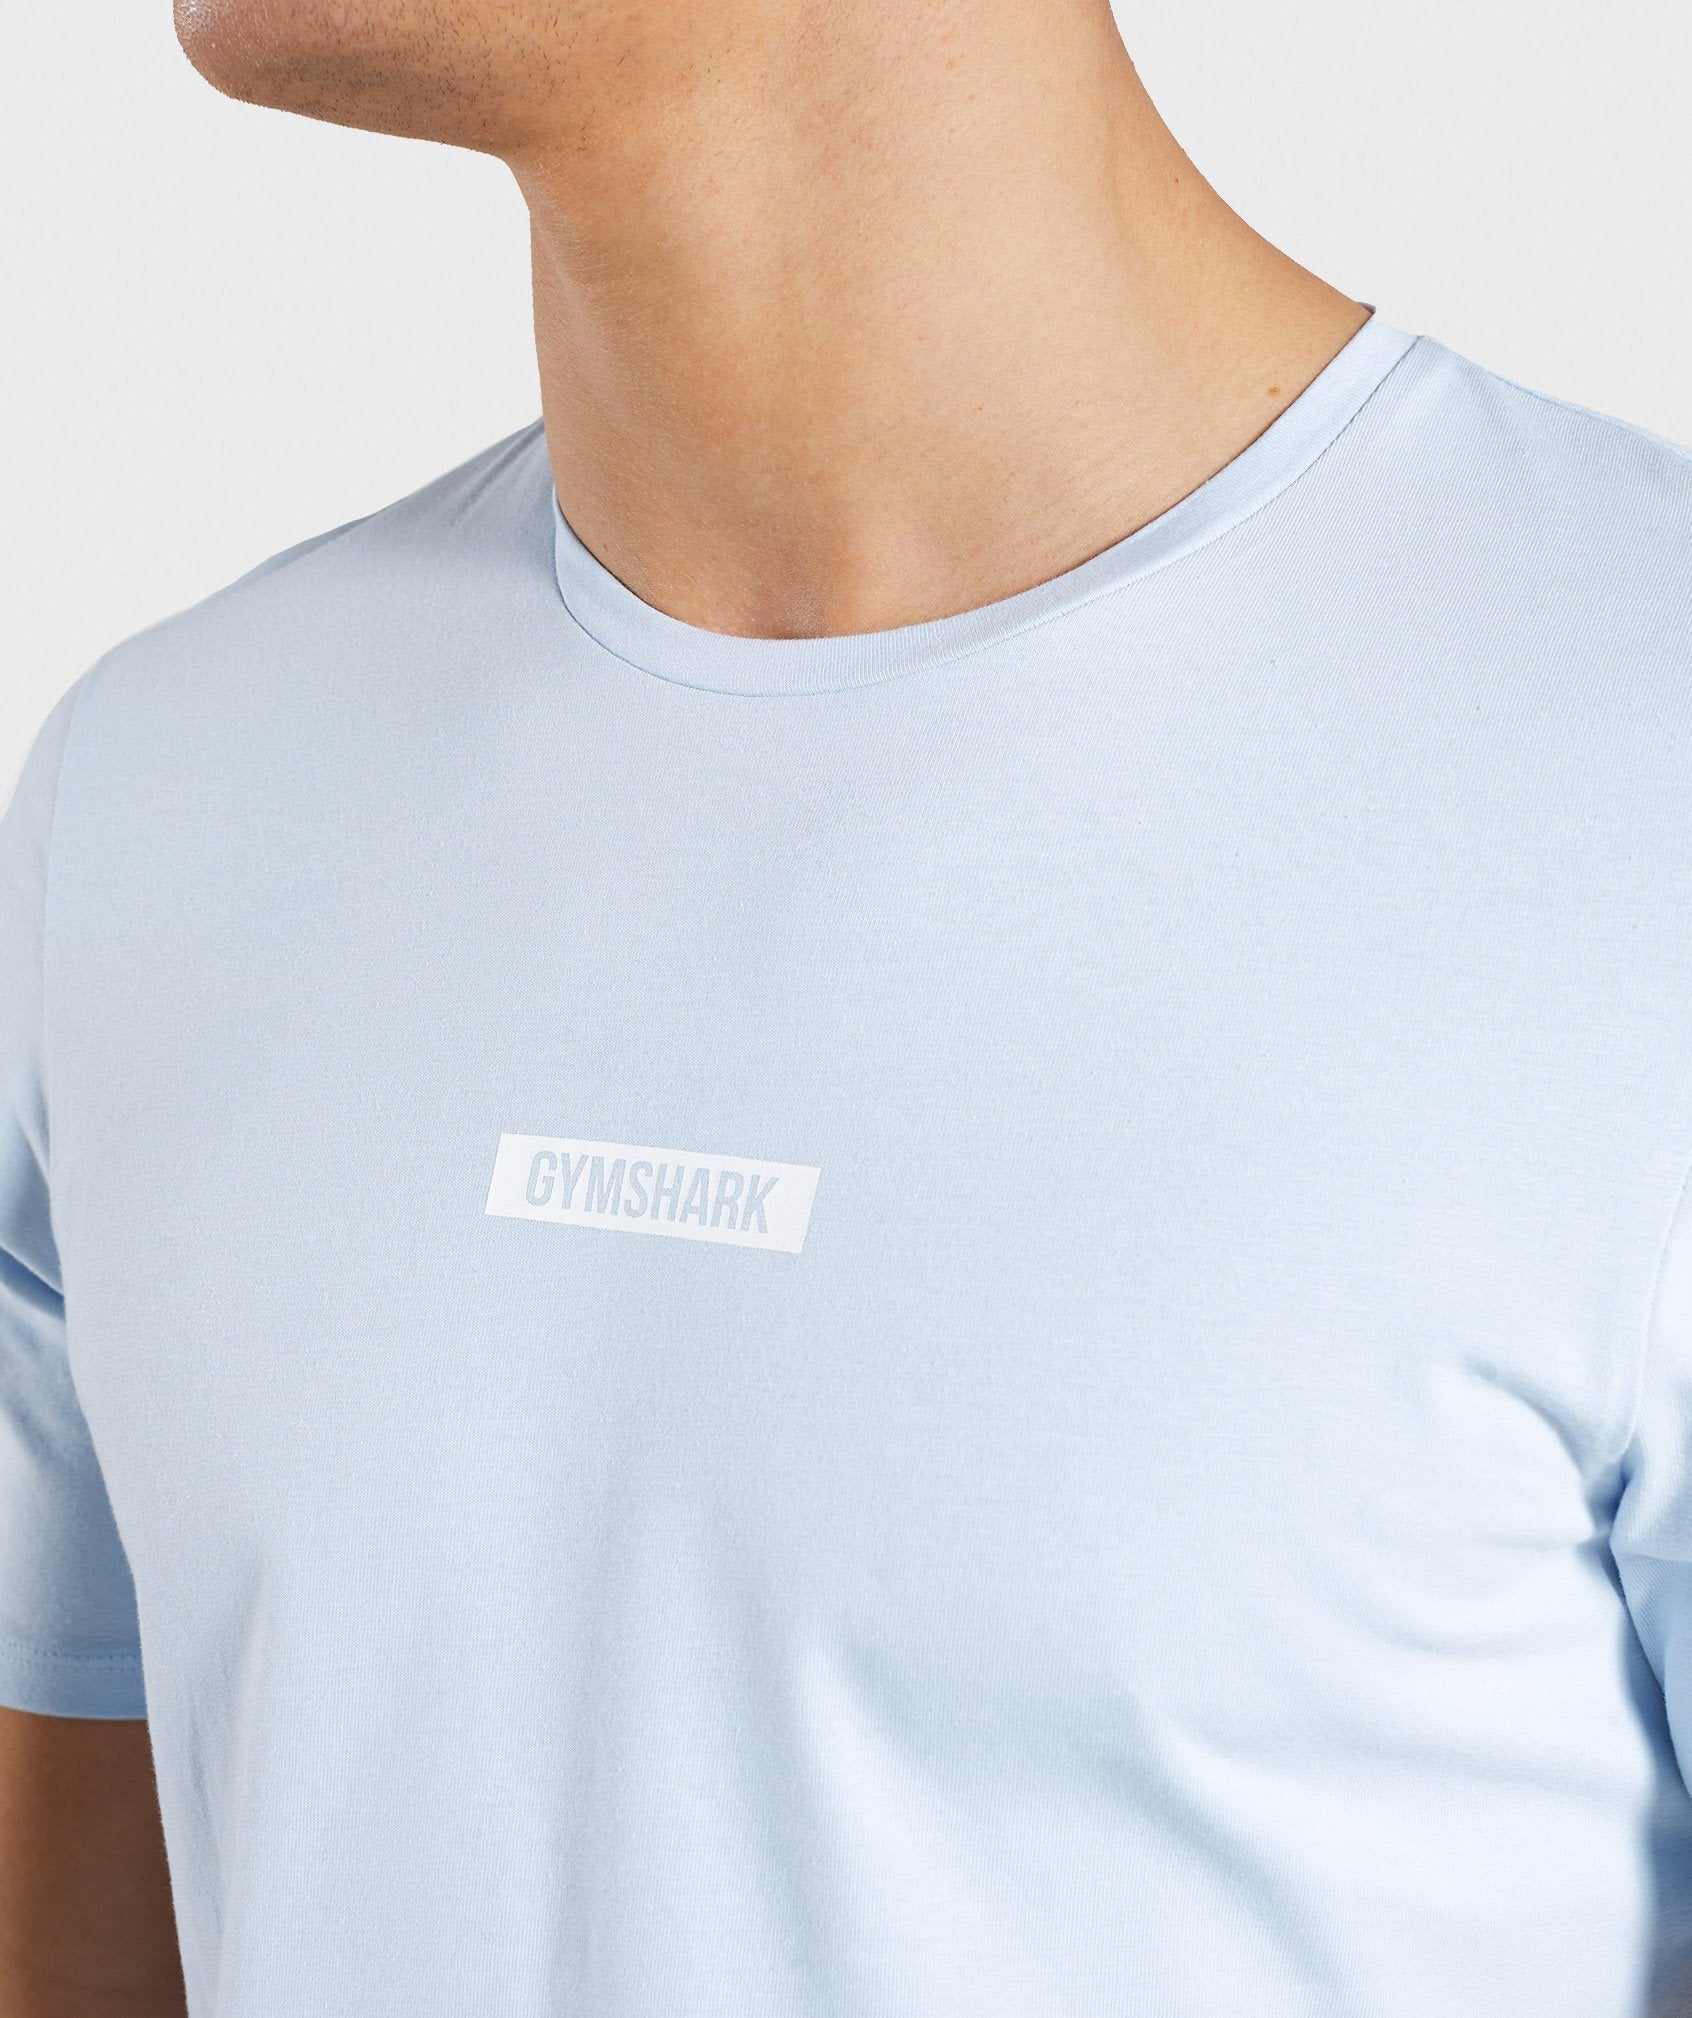 Central T-Shirt in Light Blue - view 5